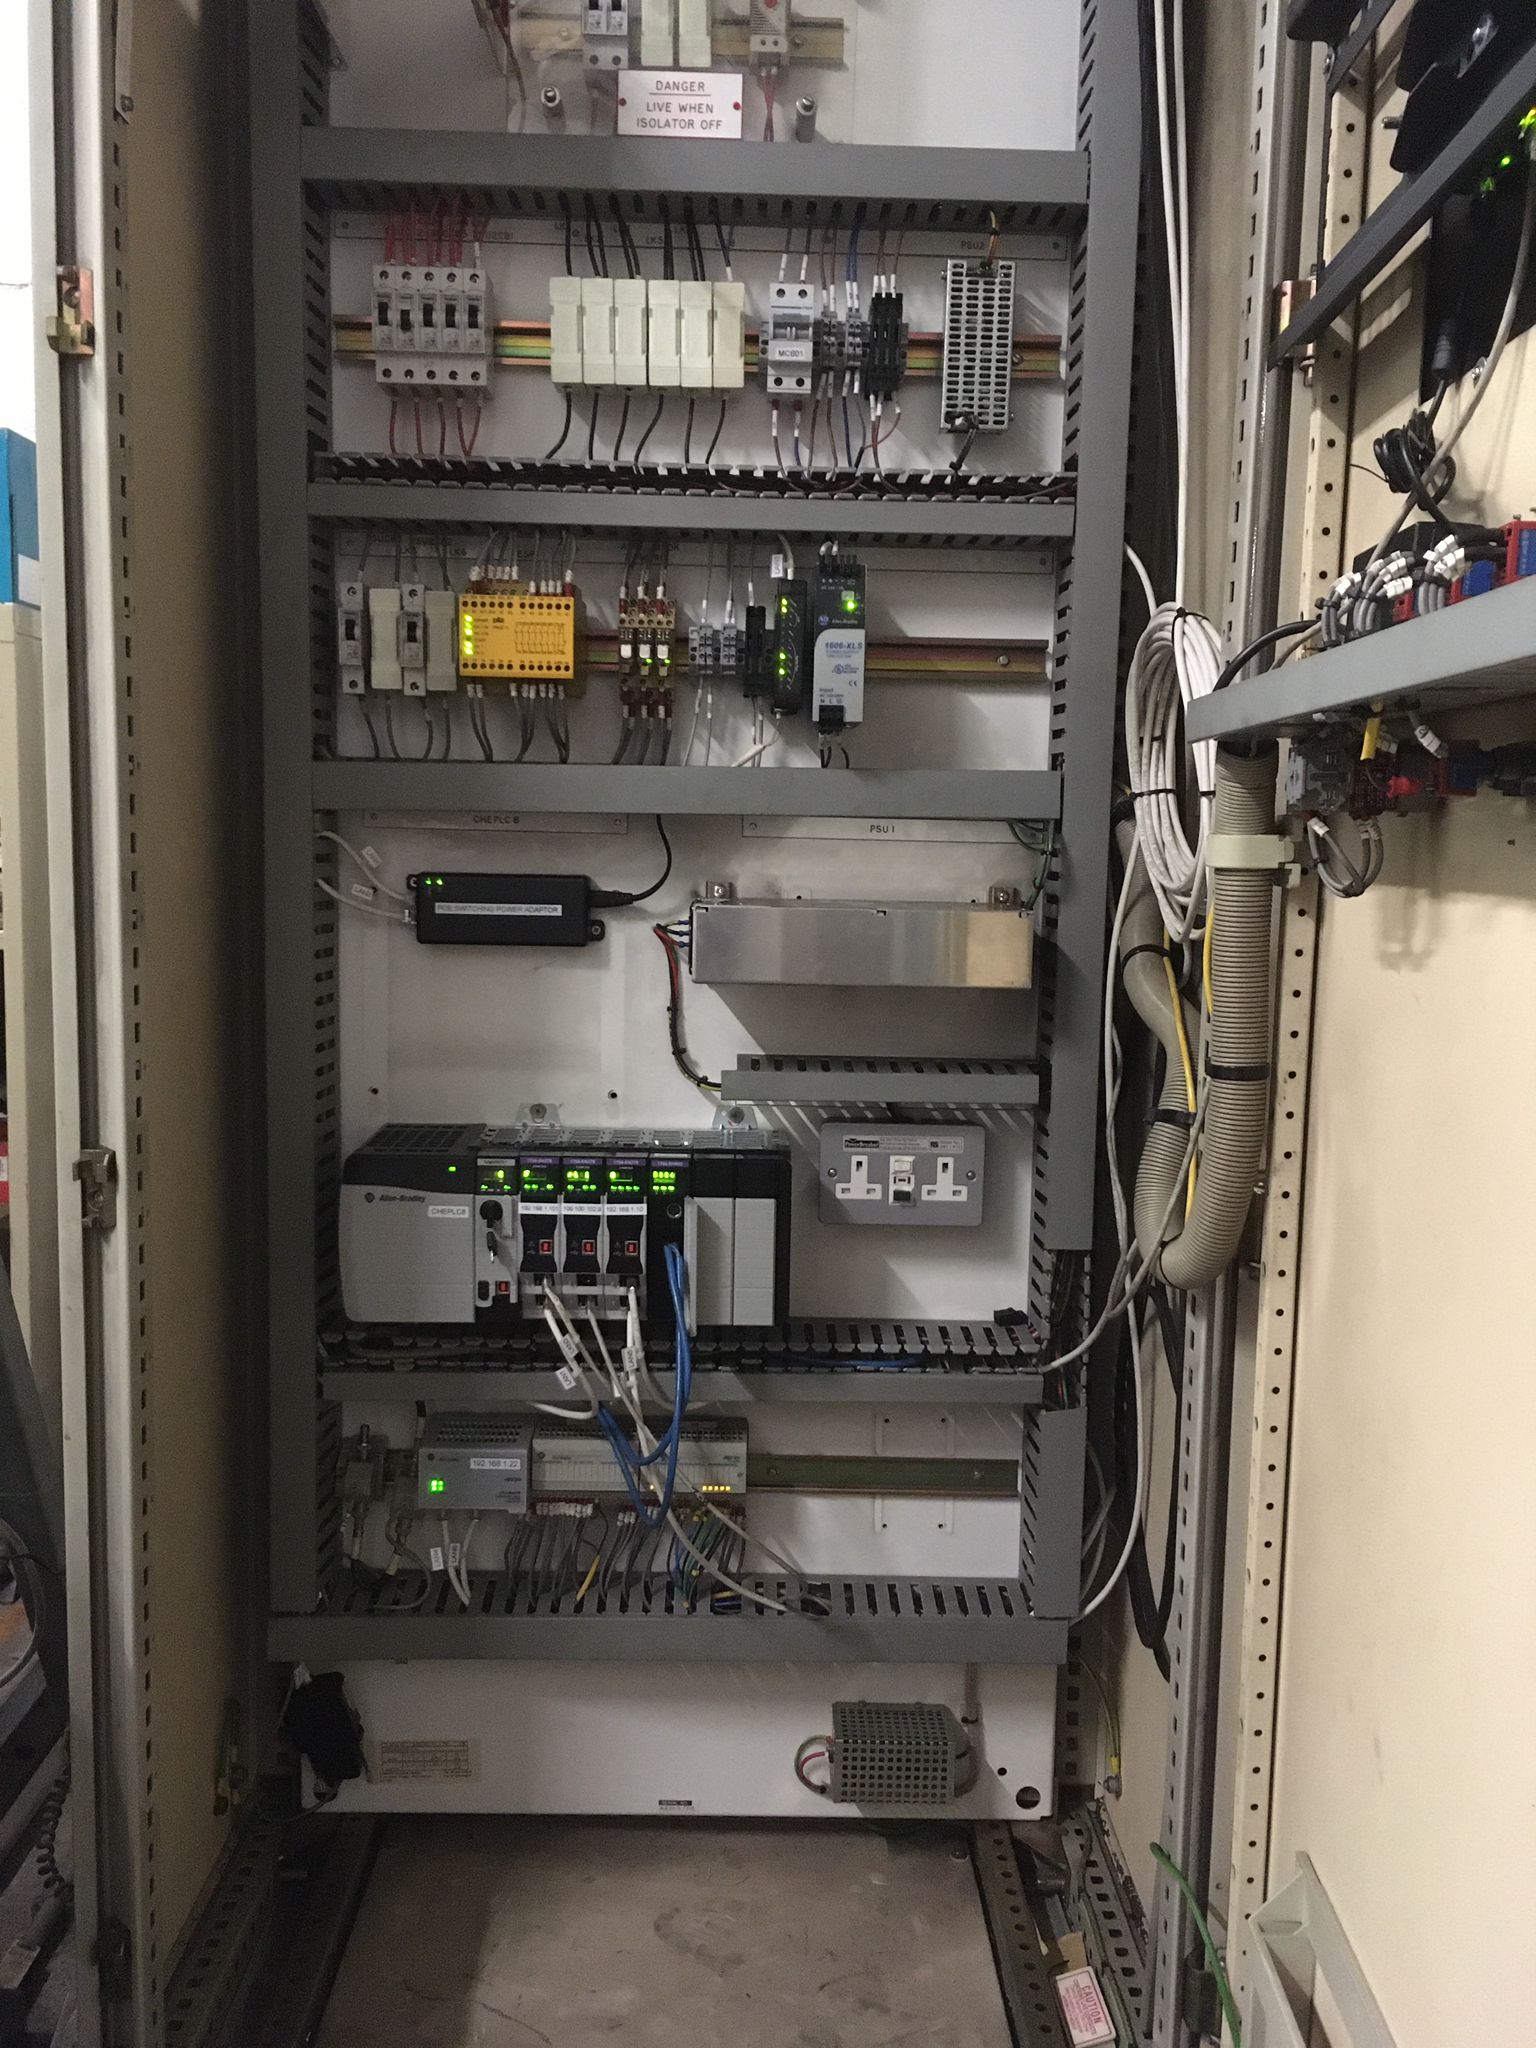 Internal View of CHEPLC Panel (Typical) After Works